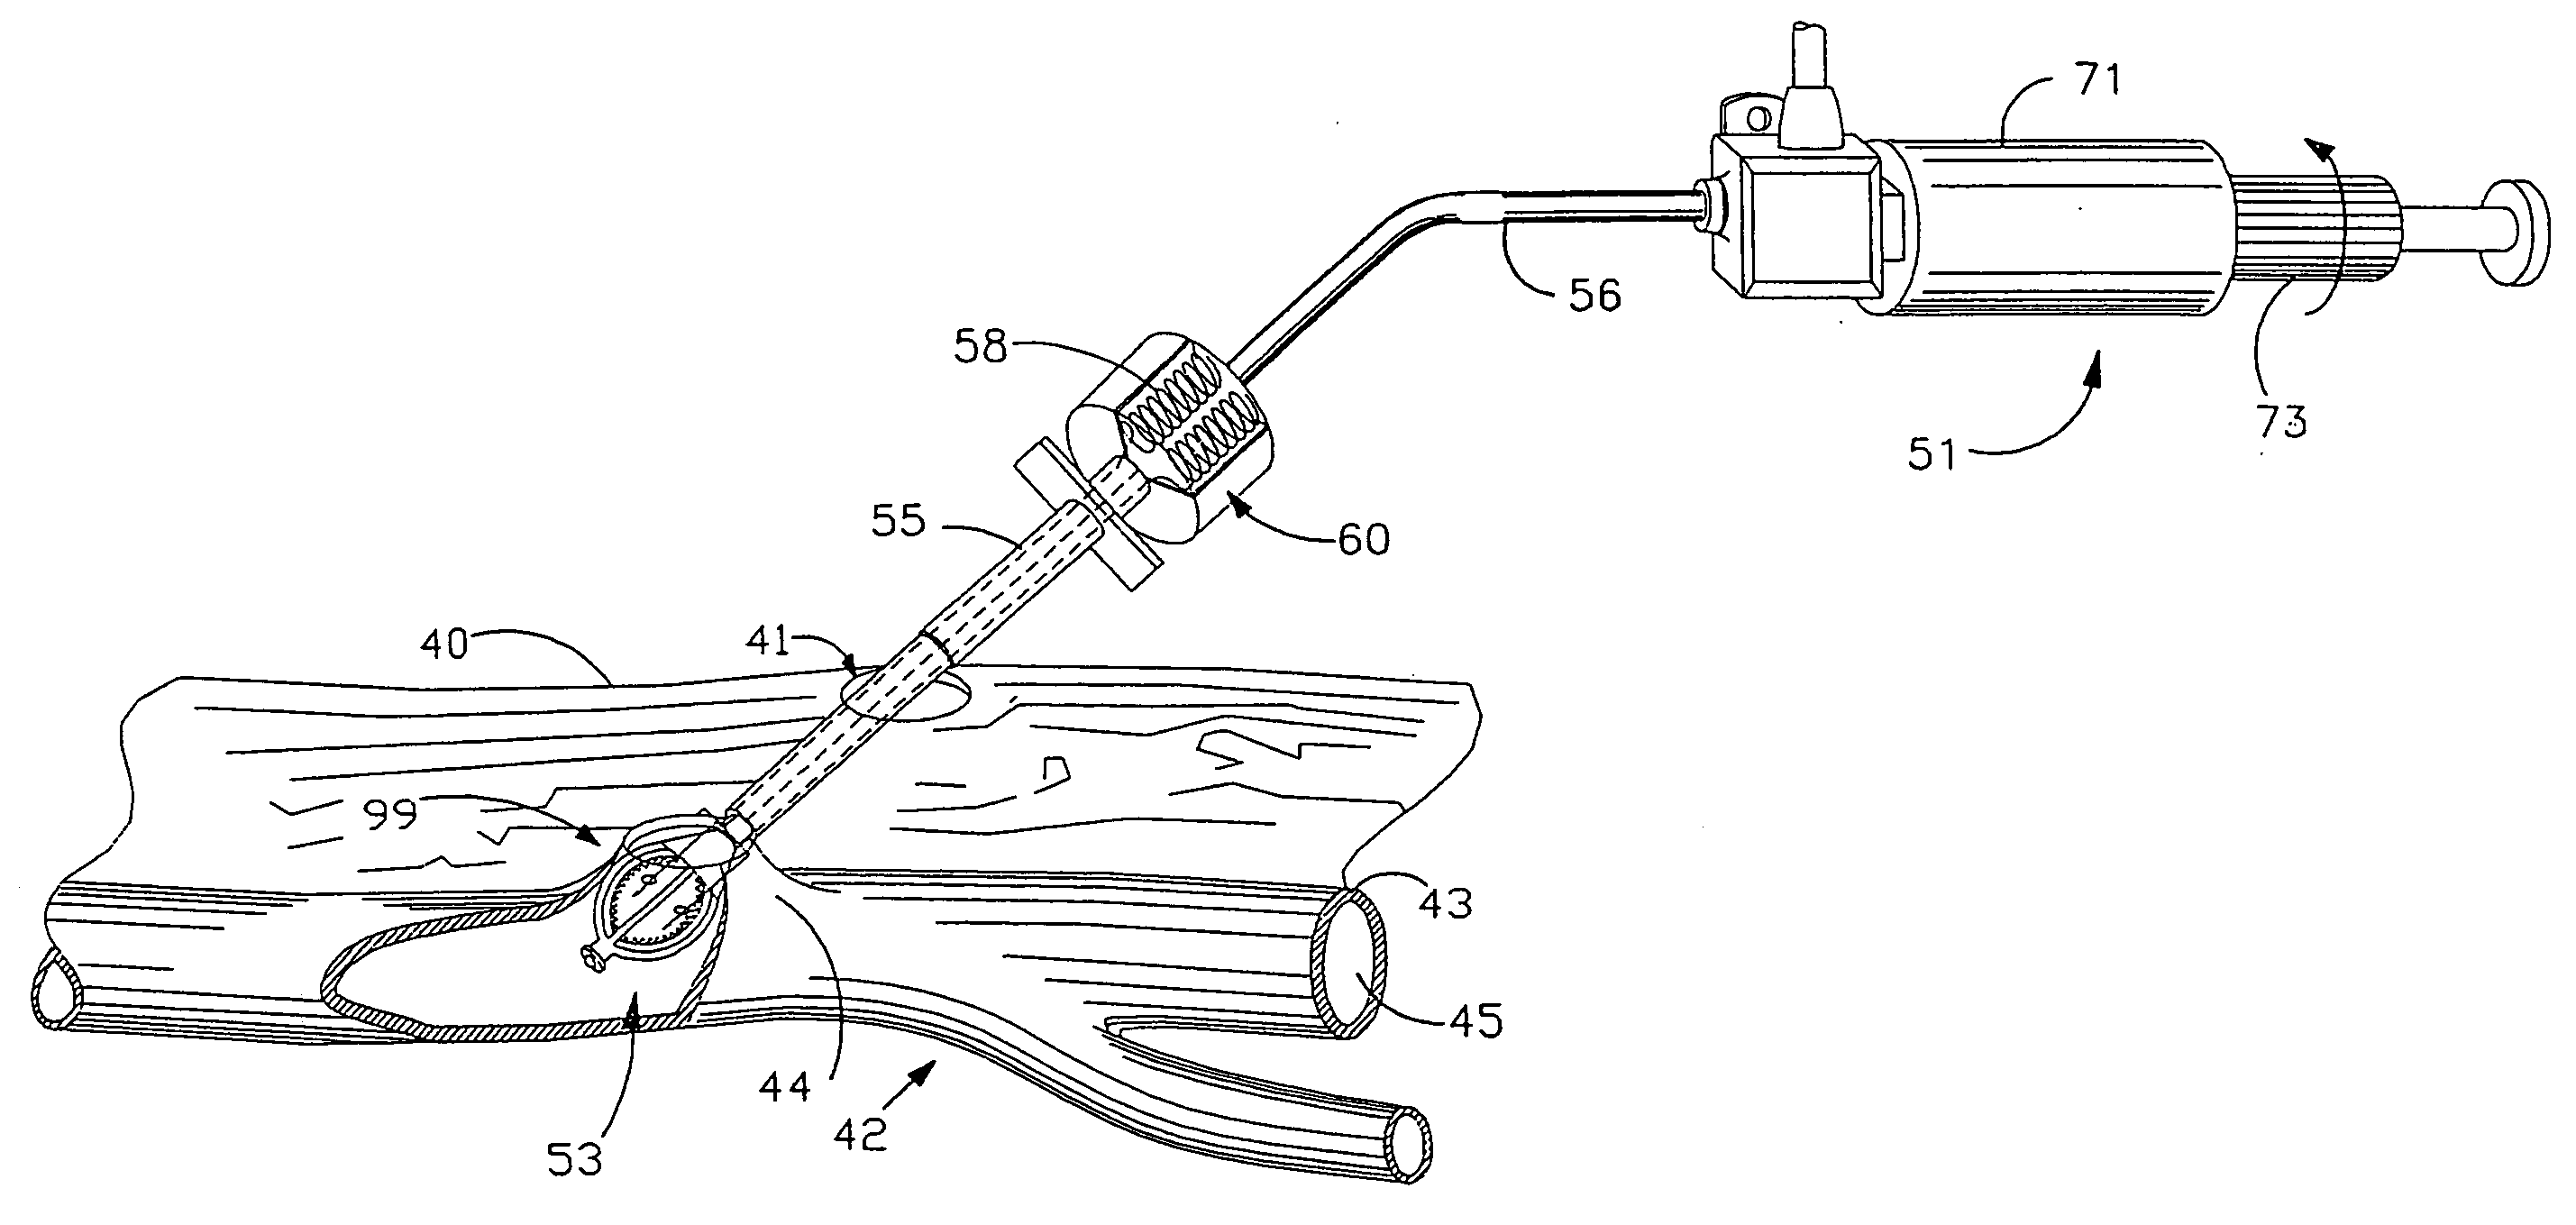 Apparatus and method for positive closure of an internal tissue membrane opening